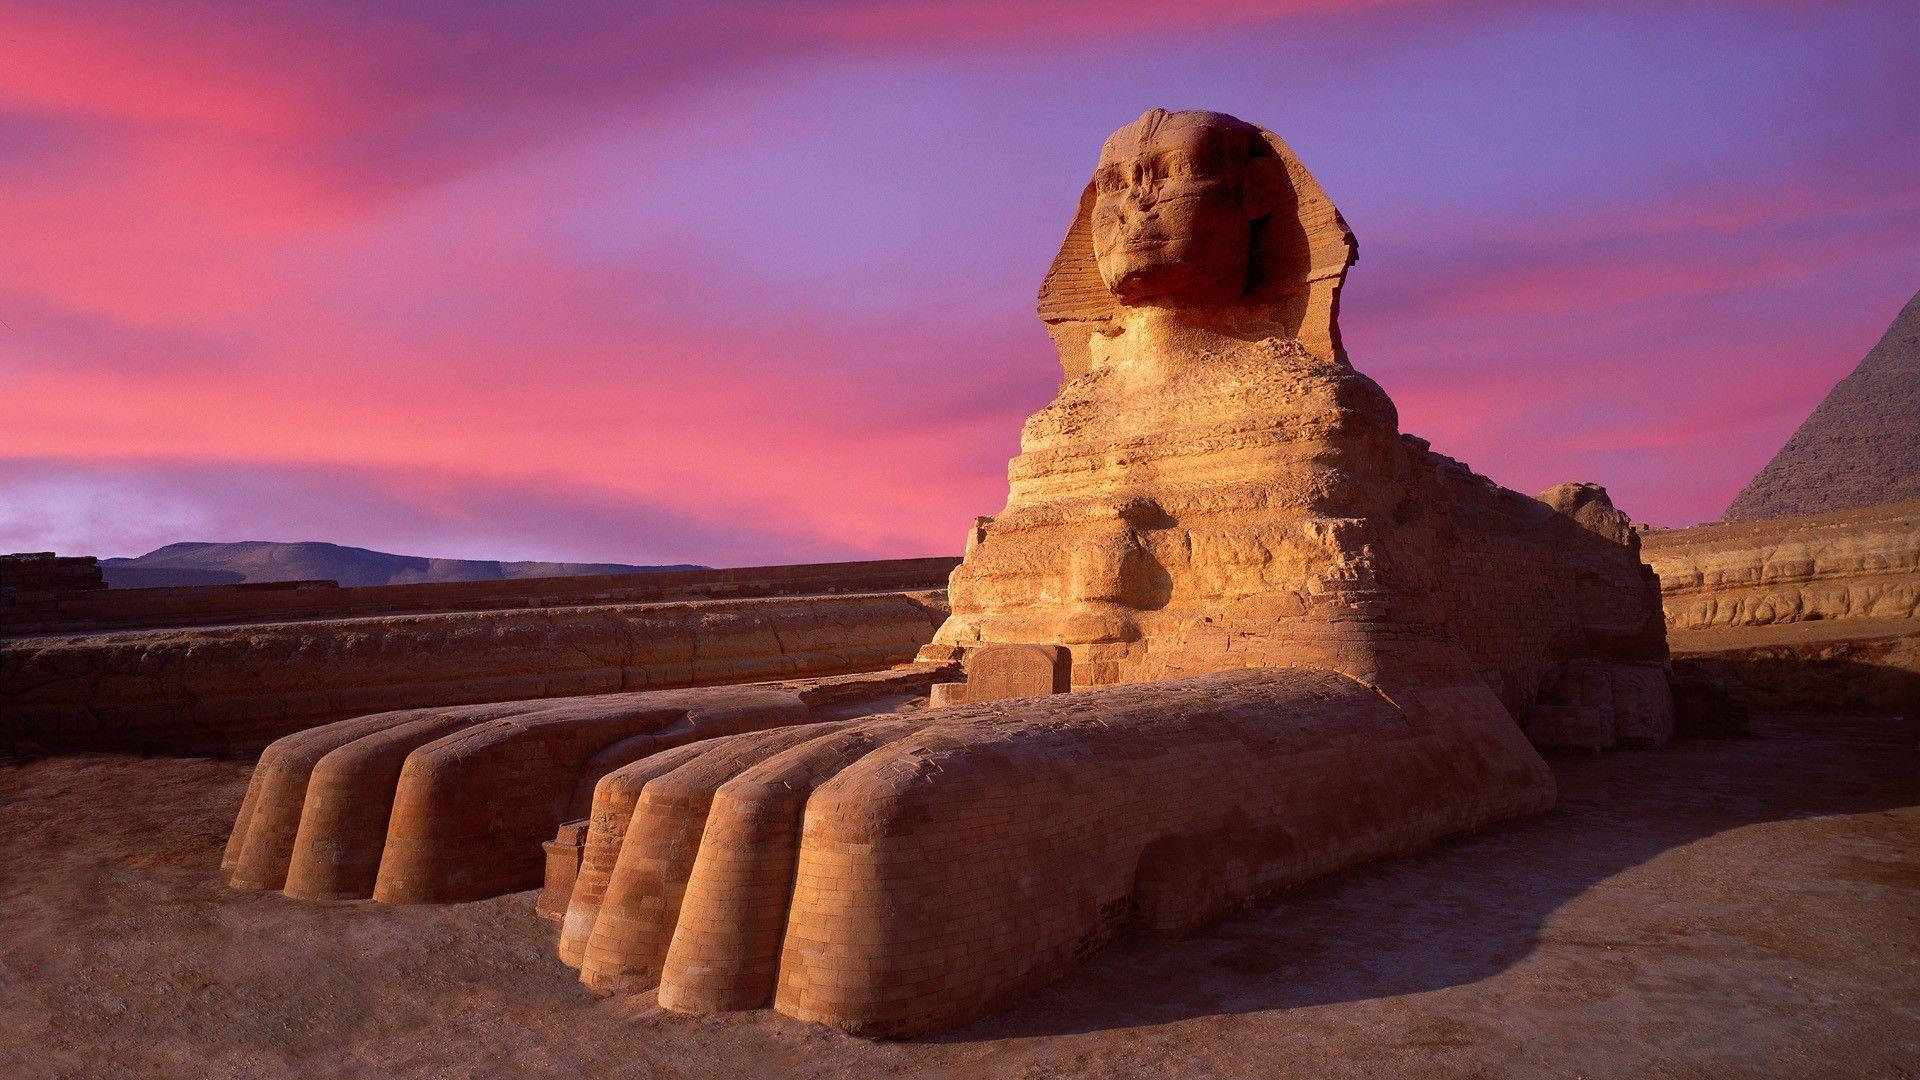 A Quoi Sert Le Sphinx D Egypte The Sphinx and the Great Pyramid.